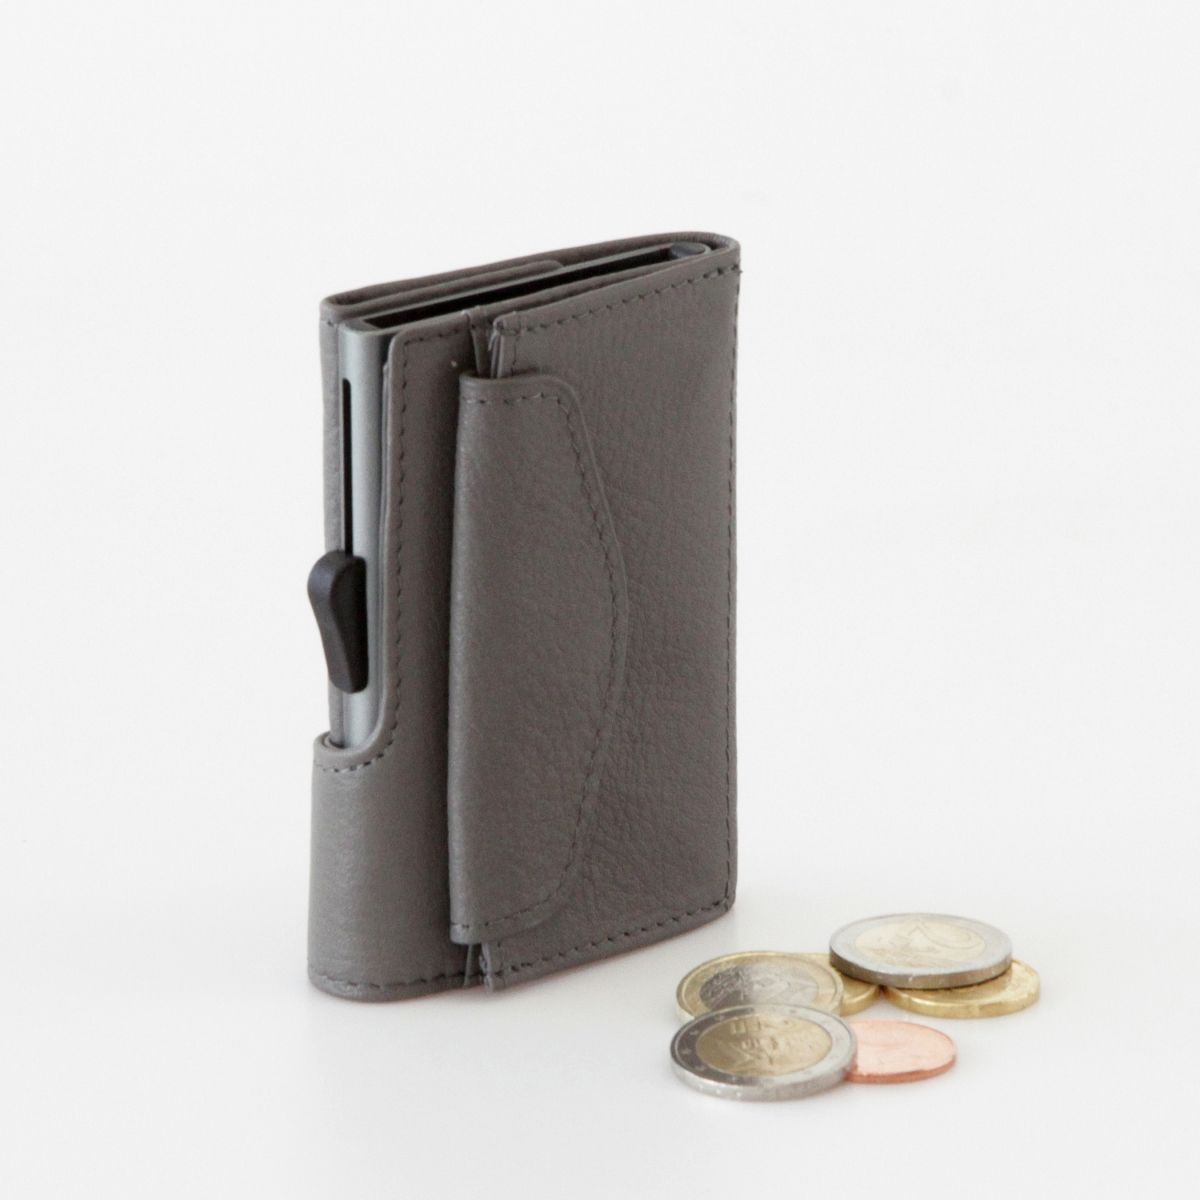 C-Secure Aluminum Card Holder with PU Leather with Coin Pouch - Grey